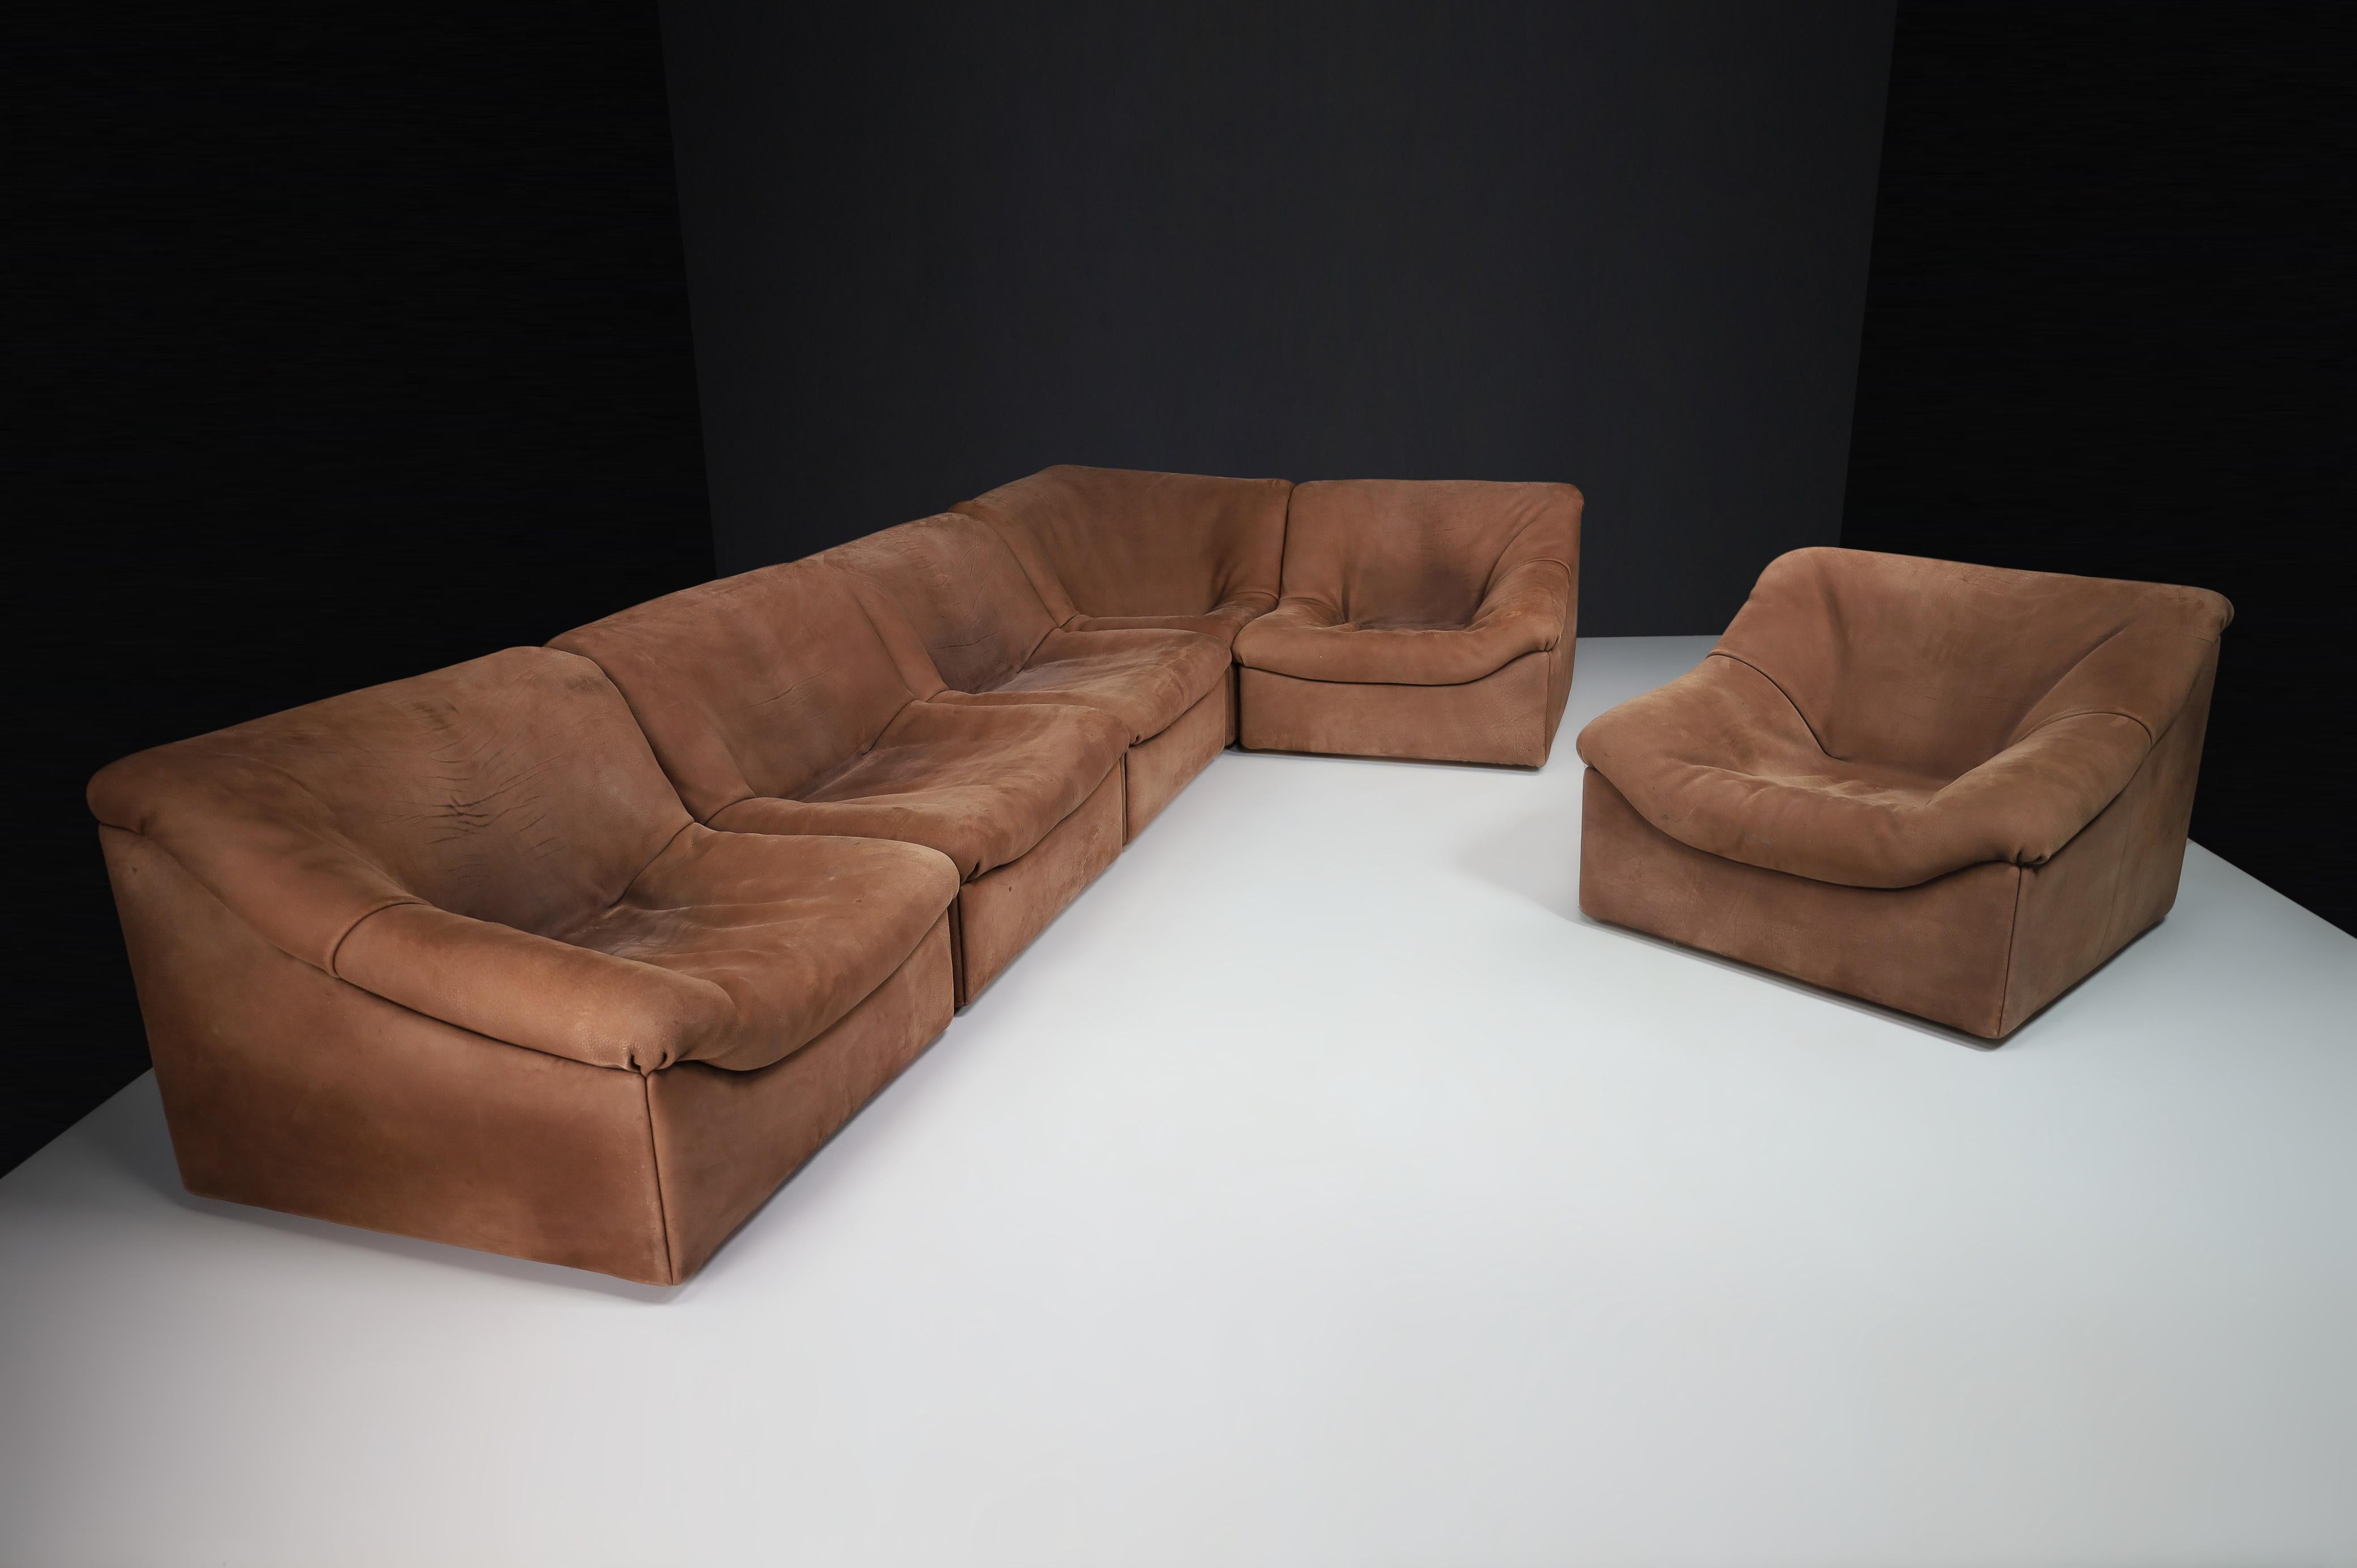 De Sede DS46 Sectional Sofa-Livingroomset in Buffalo Leather, Switzerland 1970s For Sale 8